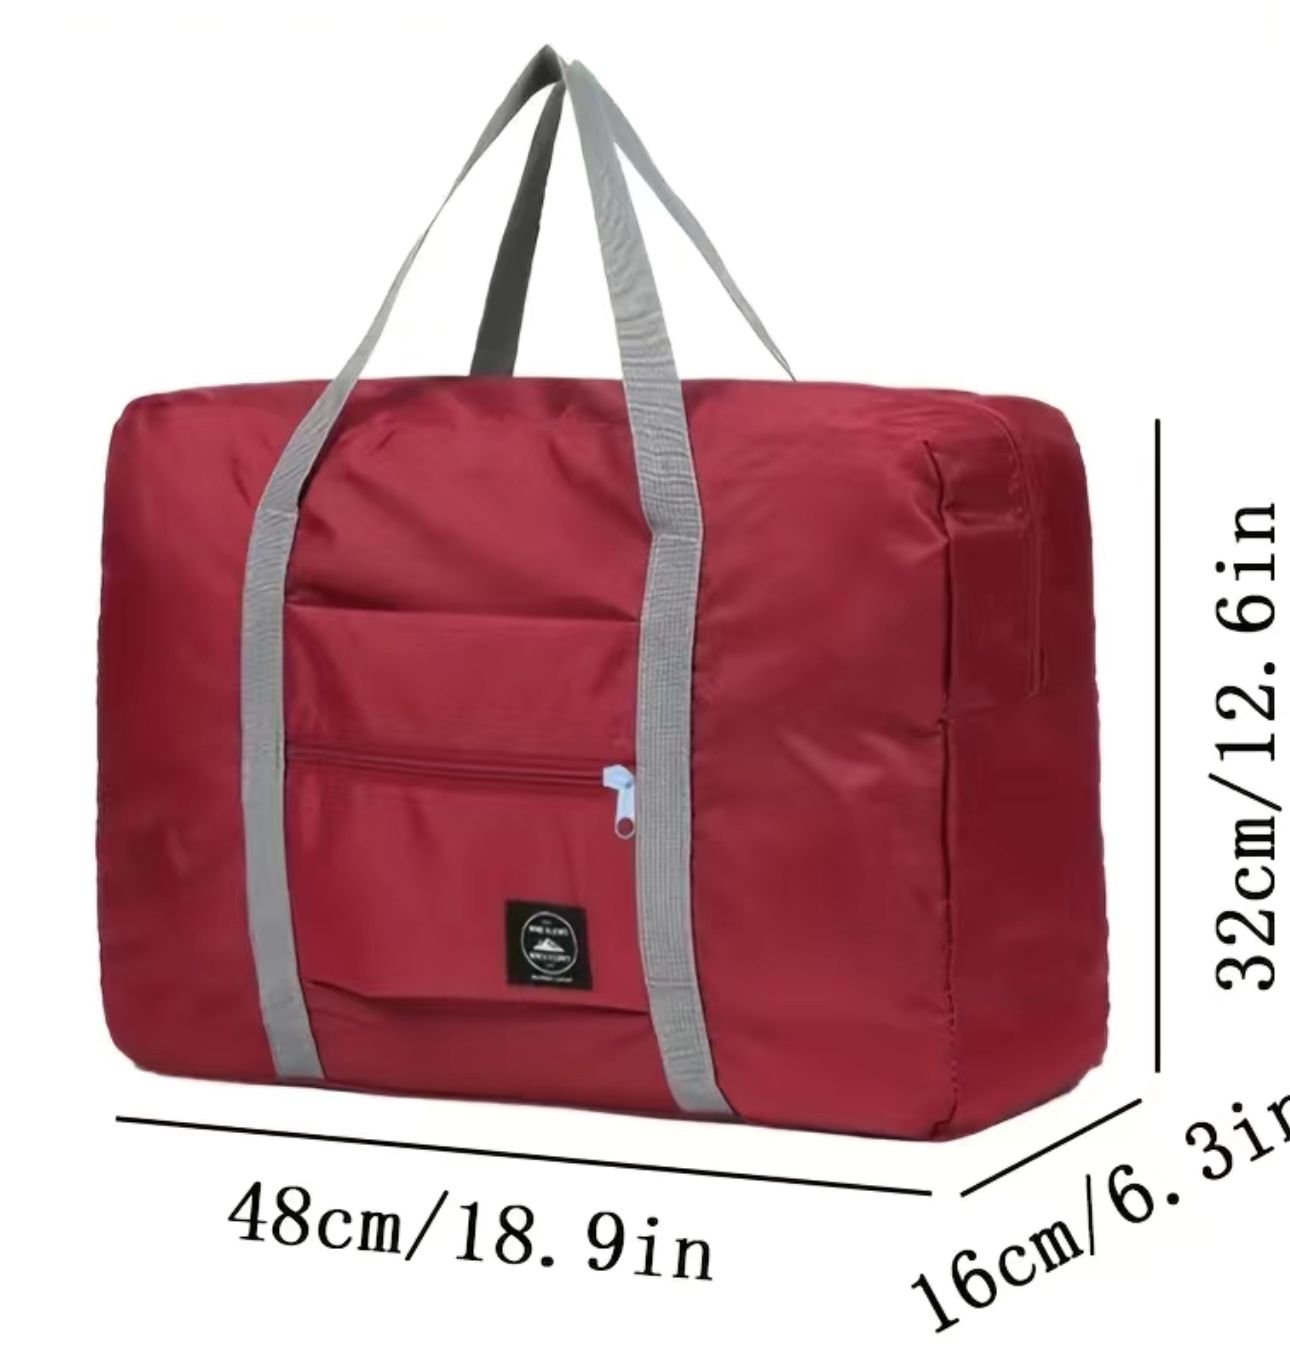 Travel In Style With This Foldable, Waterproof, Large Capacity Storage Bag - Perfect For Business Trips!